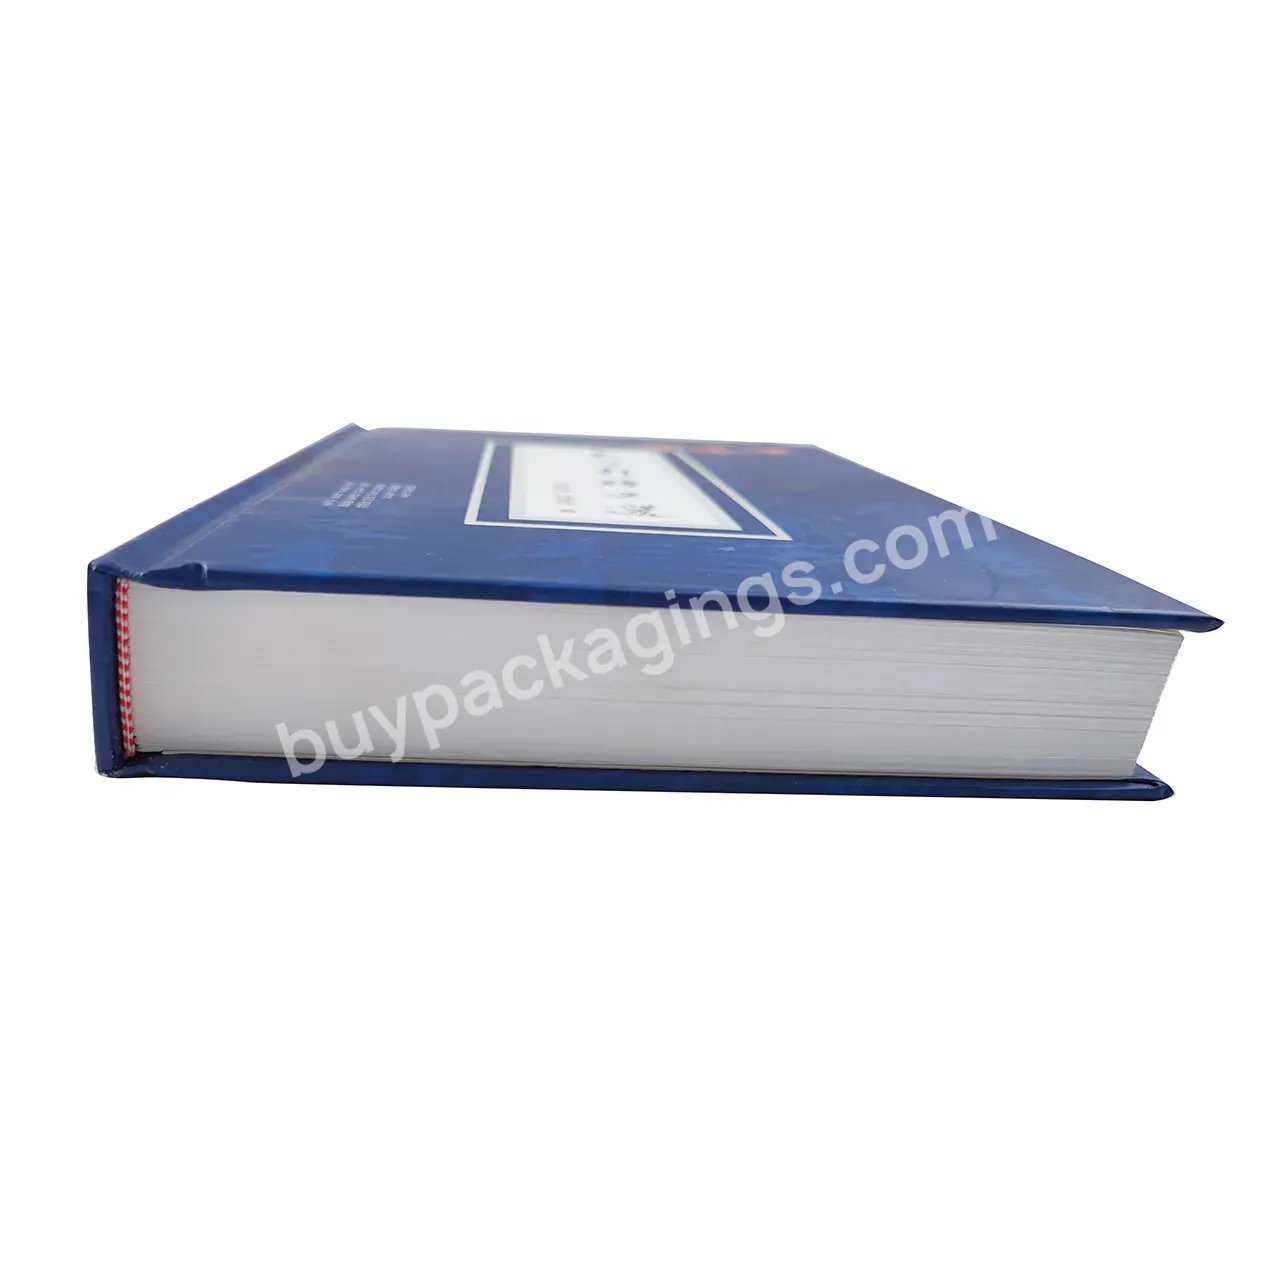 Factory High-quality Customized Hardcover Book Printing Servicehot Sale Products - Buy Hardcover Book,Book Printing Service,Hardcover Book Printing.